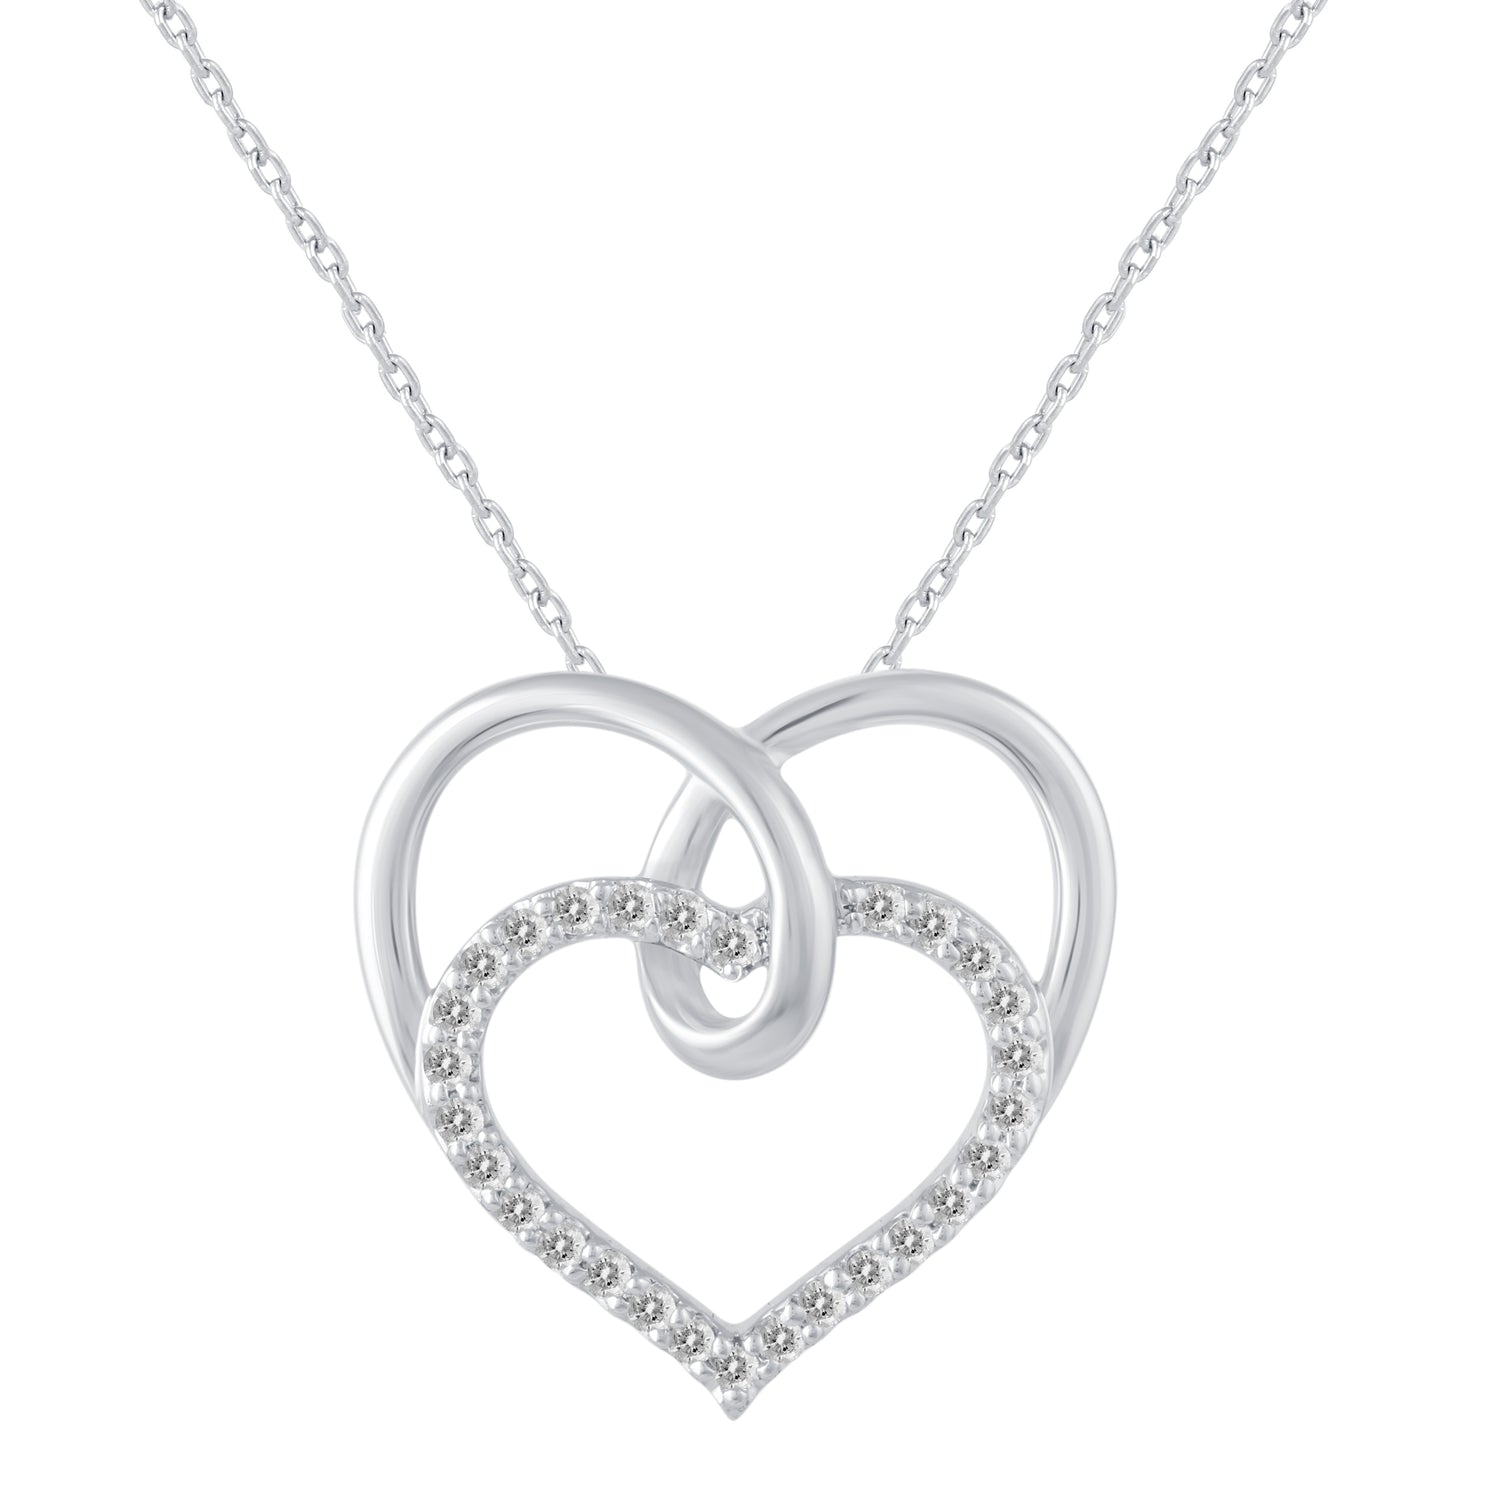 1/4 Cttw Diamond Twin Heart Pendant Necklace set in 925 Sterling Silver